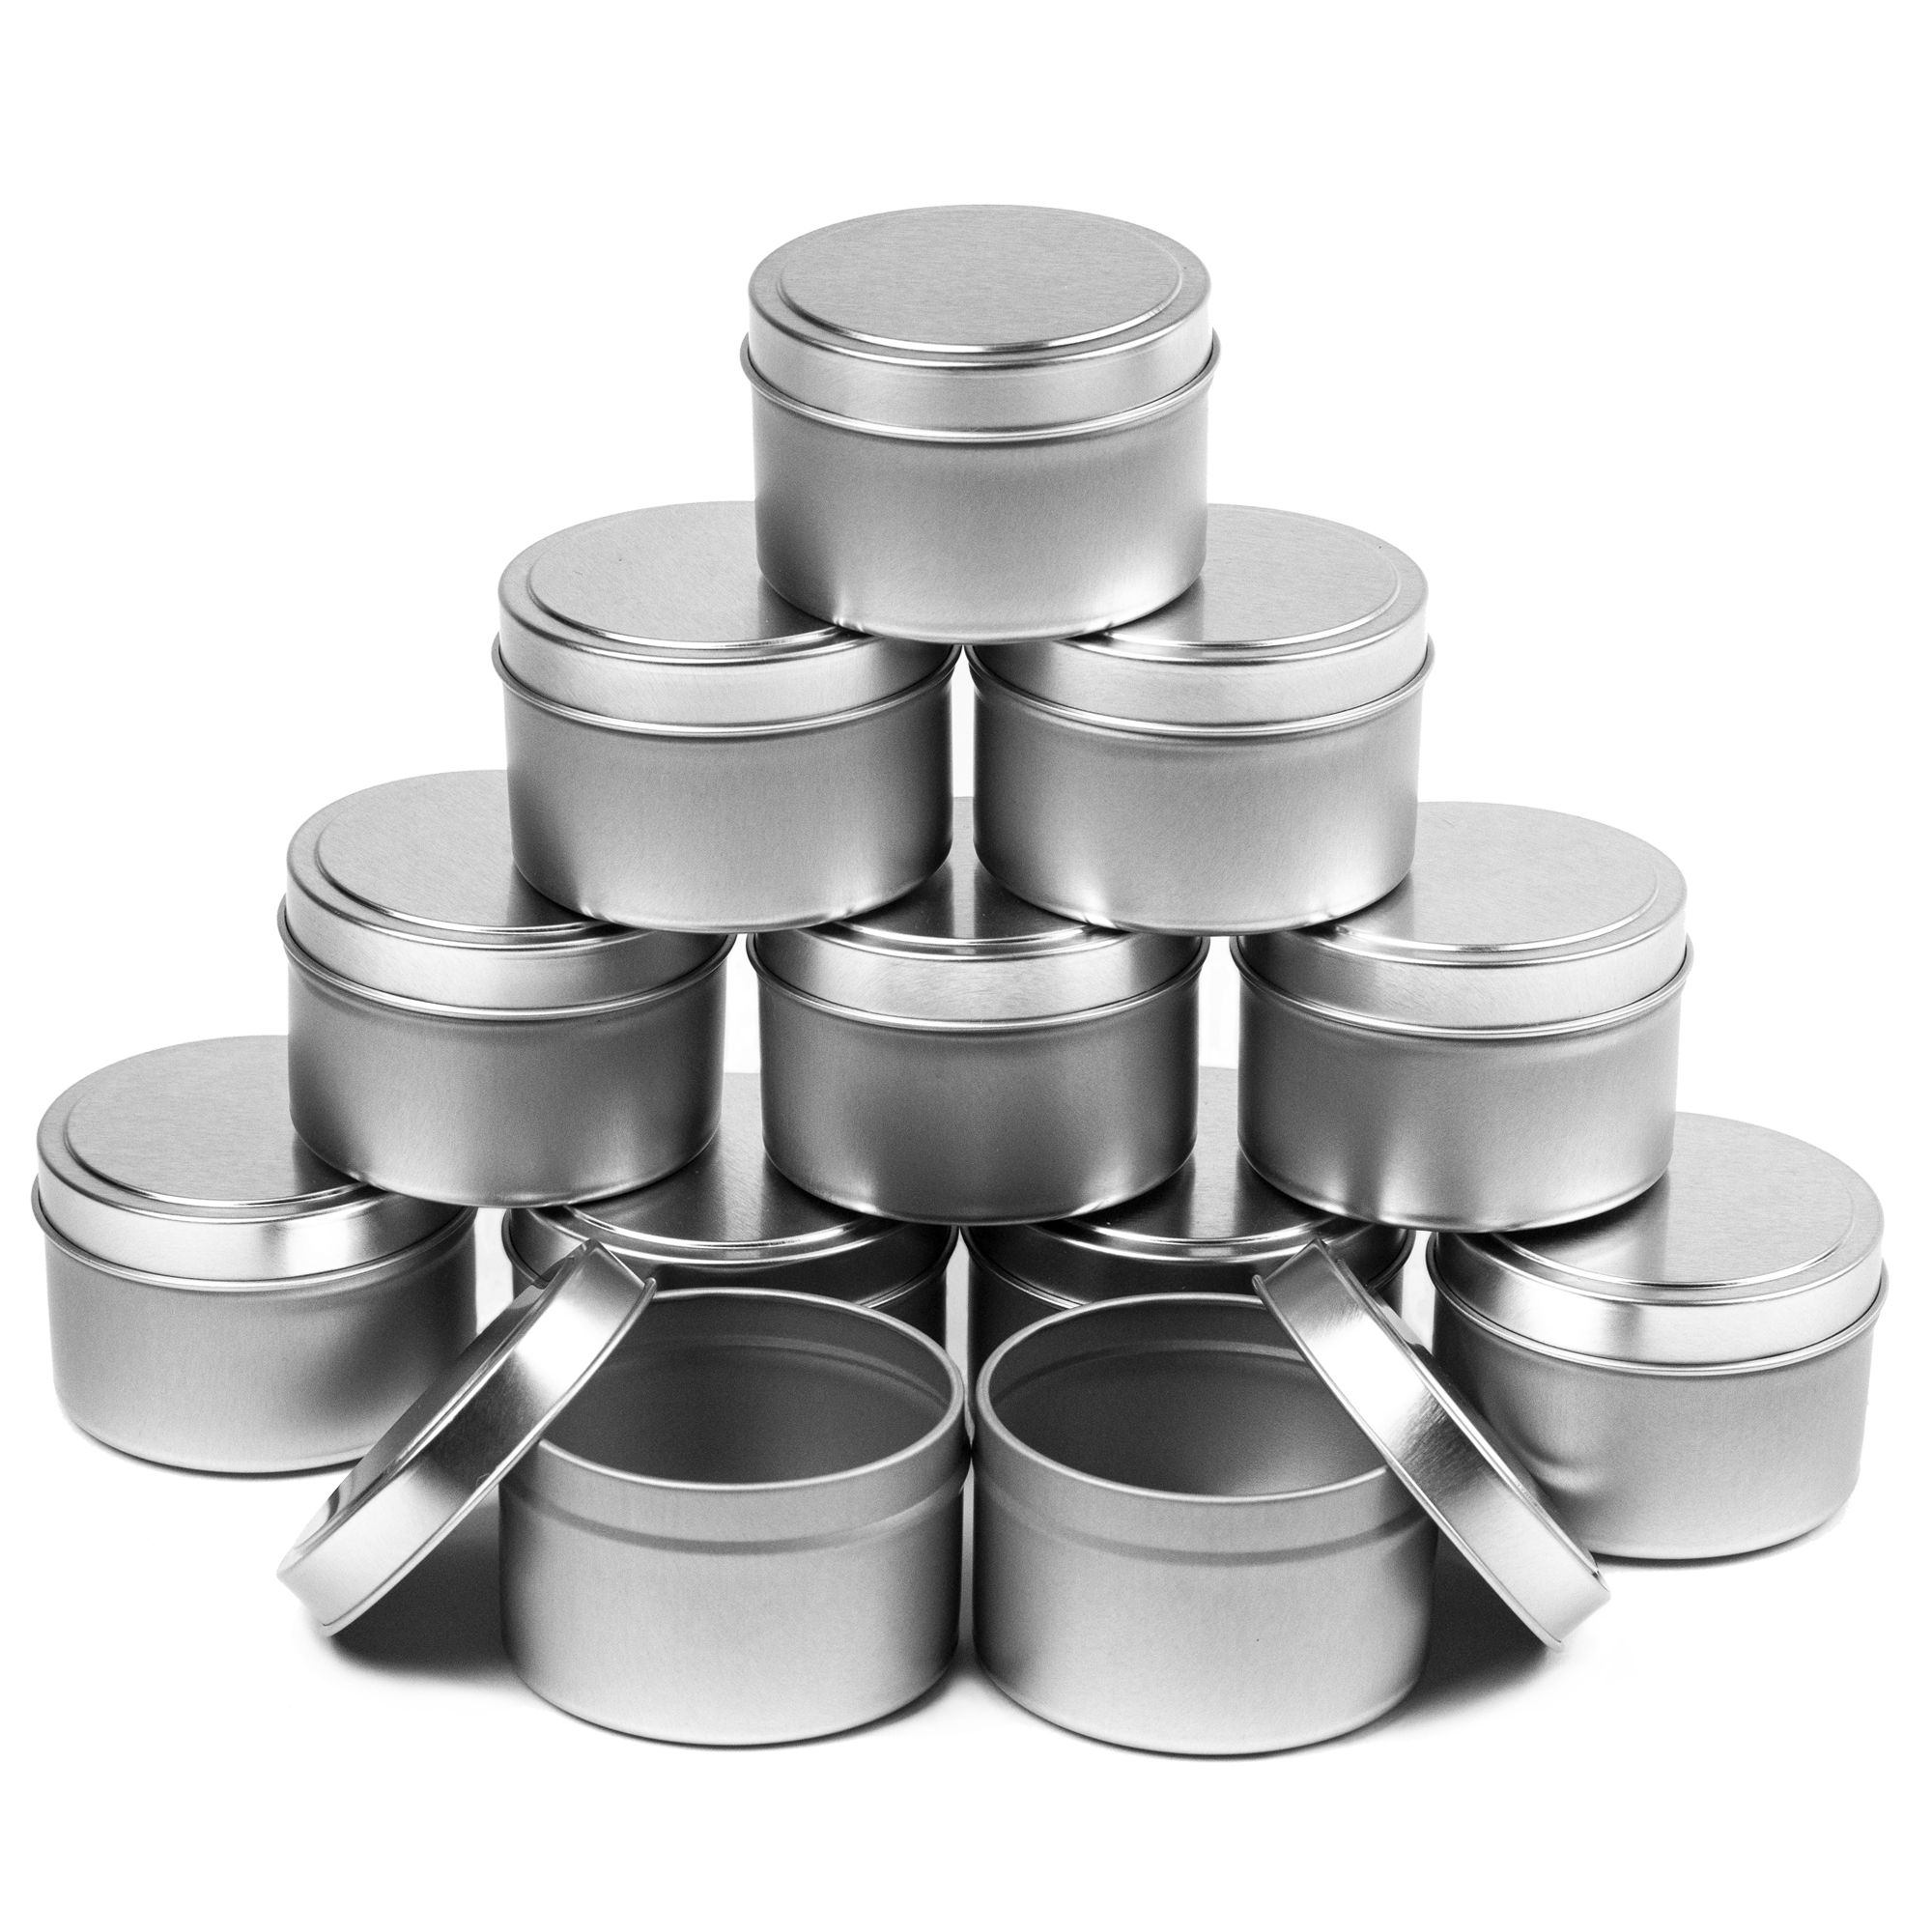 Pink Lavender Candle Tins 8 Oz With Lids 12-pack of Candle Jars